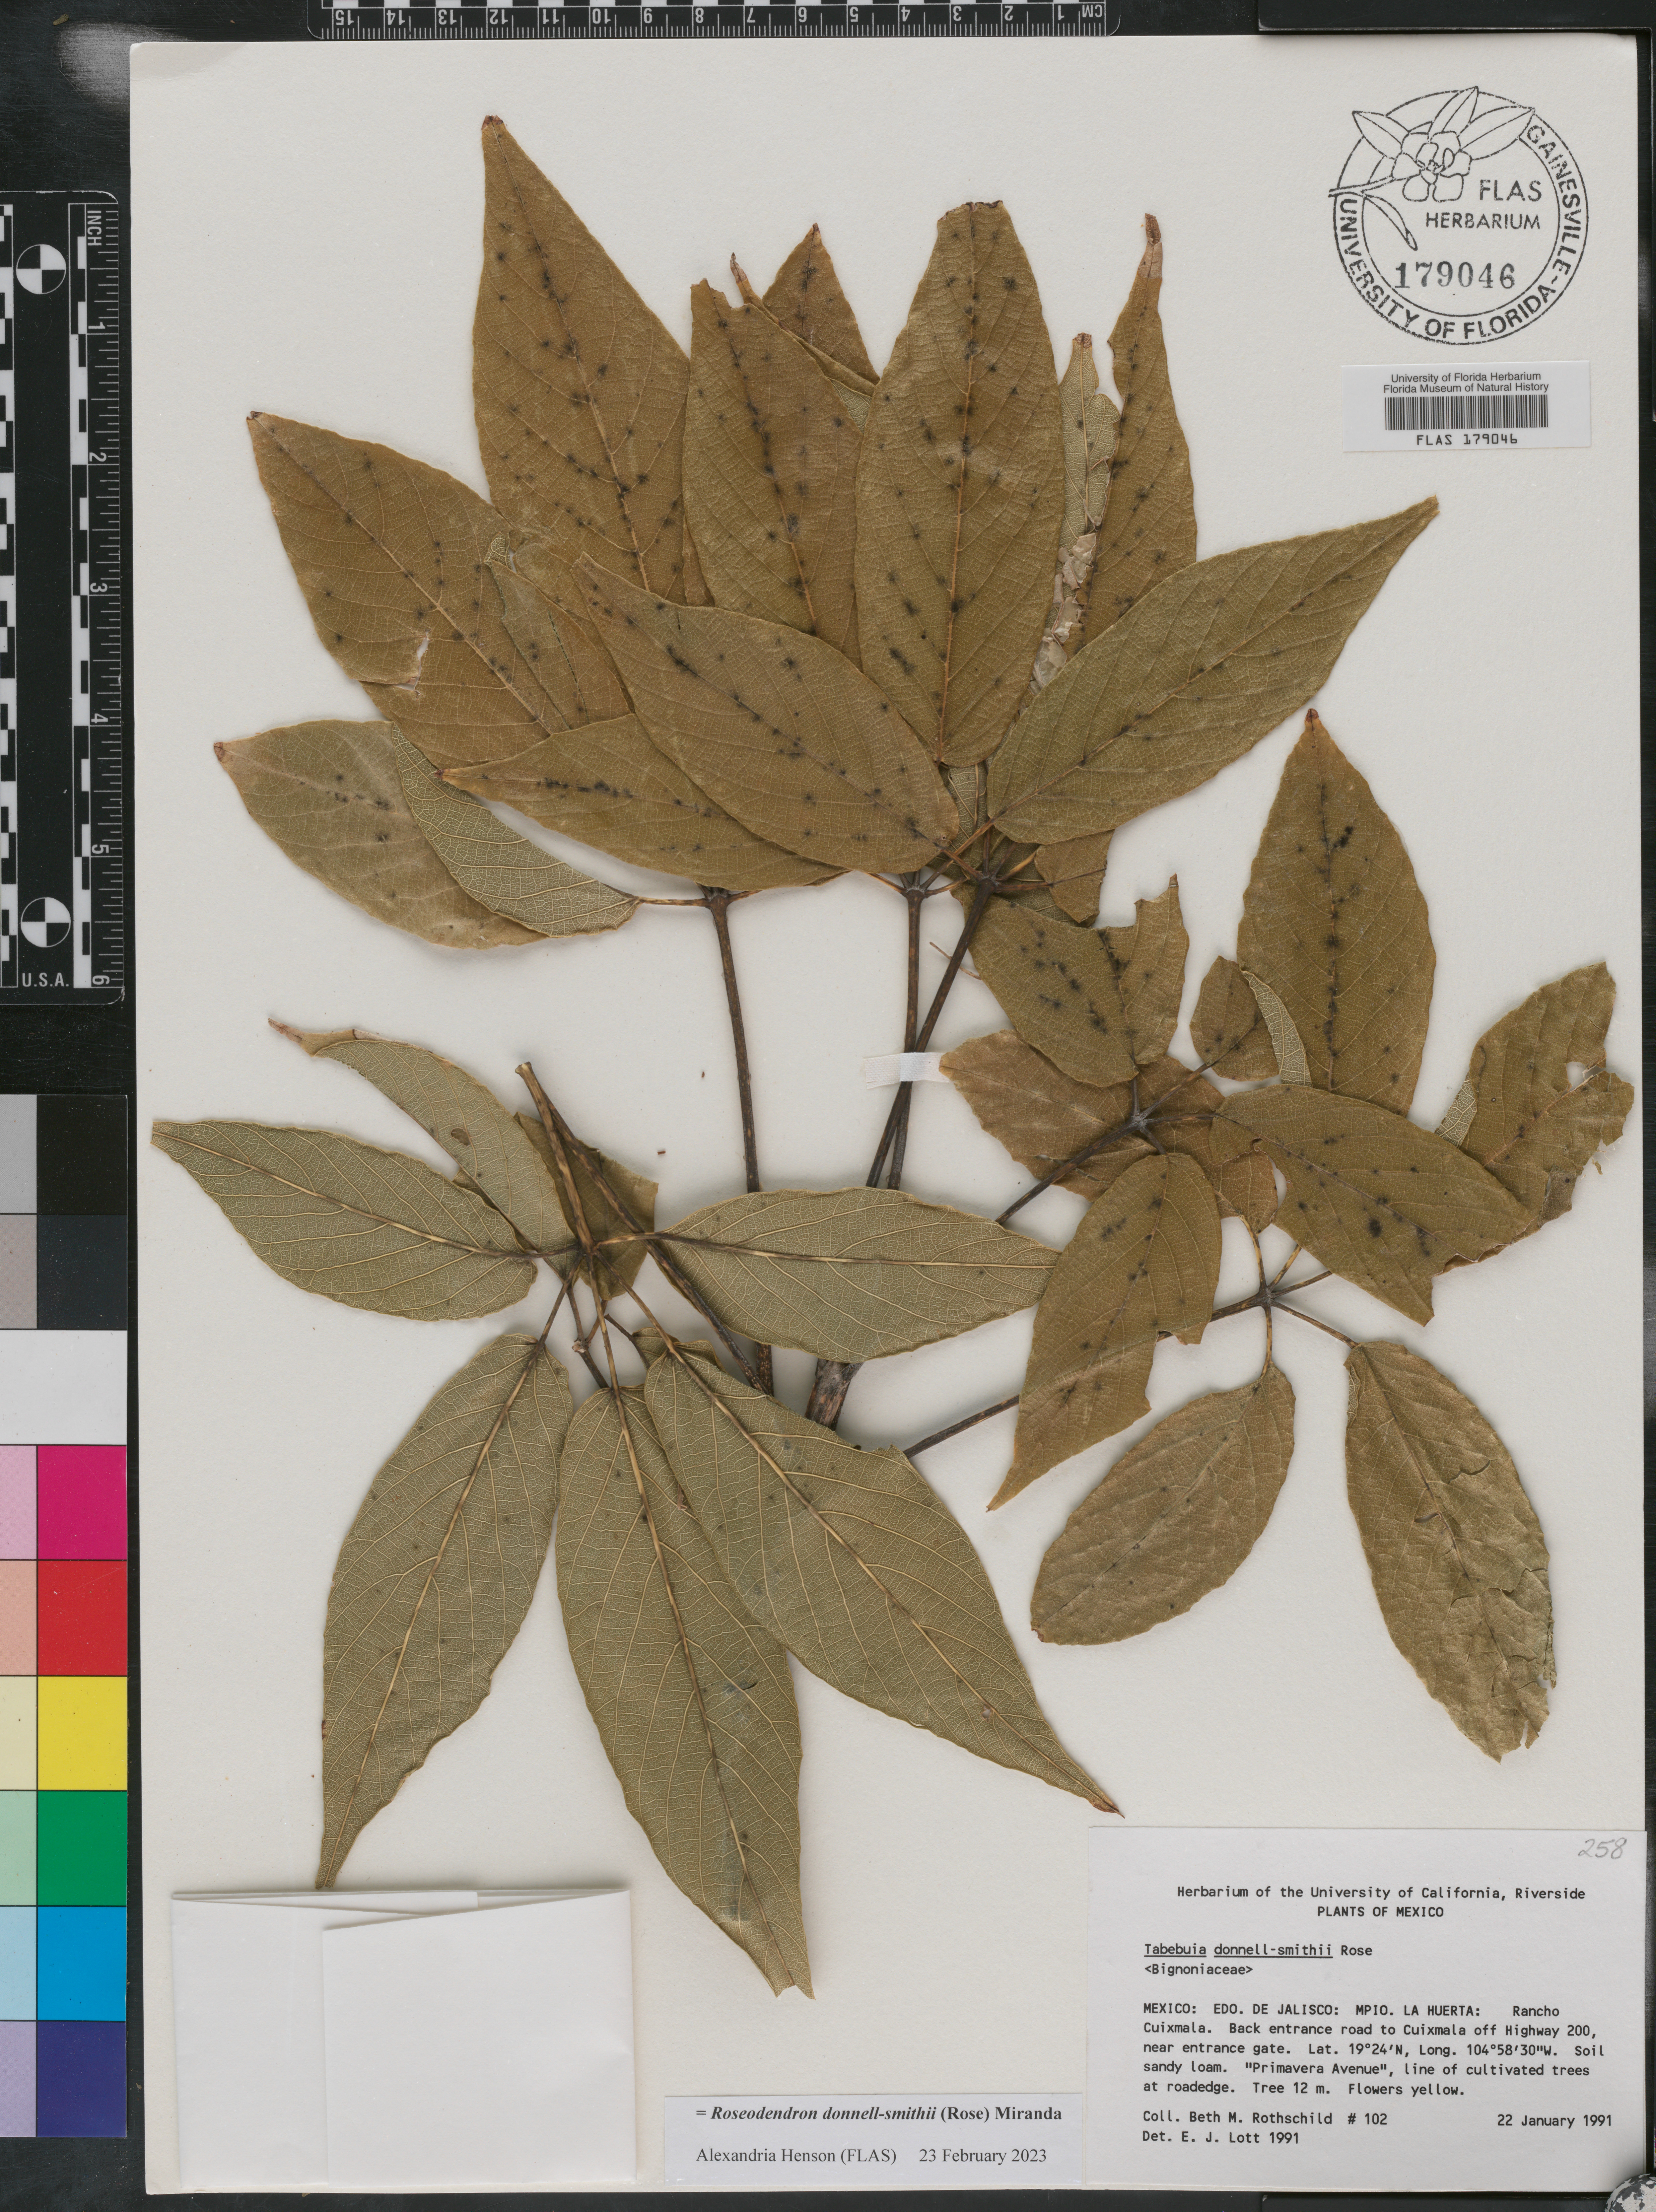 Roseodendron image